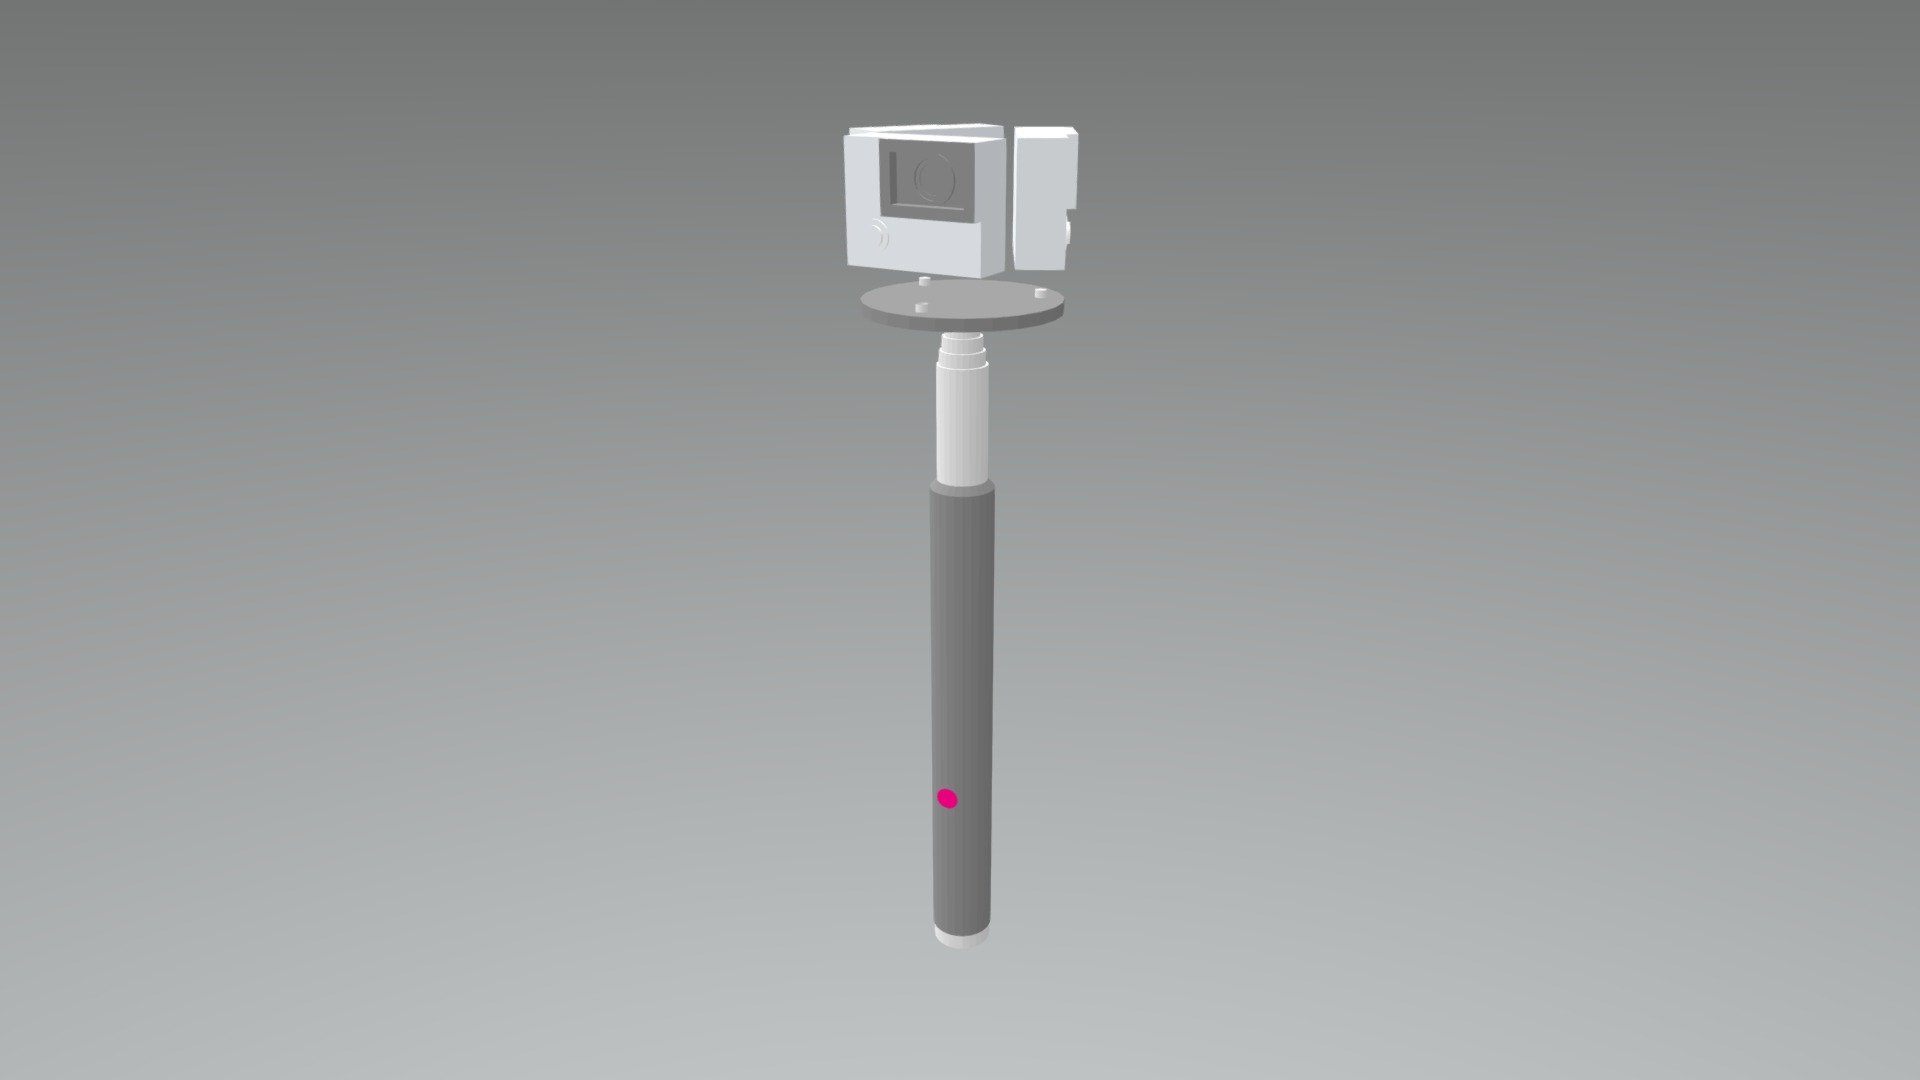 Rough model of a selfie stick on steroids. By attaching 3 GoPro cameras, it will allow you to capture &amp; share 360° of beautiful video! - 360 Video Stick - 3D model by jonsmith14000 3d model